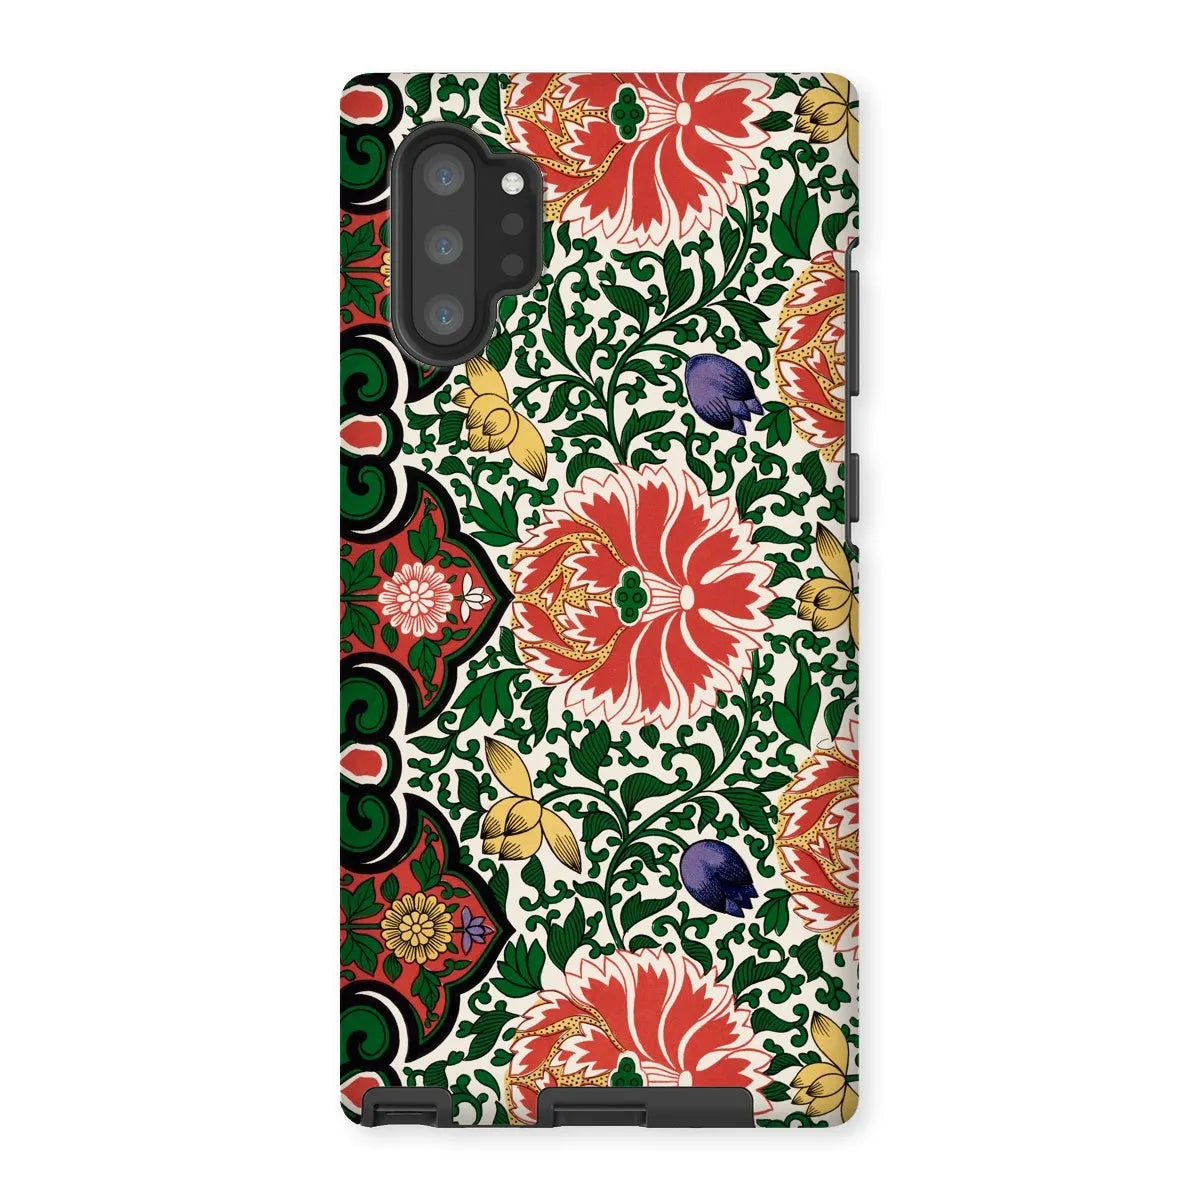 Chinese Floral Pattern Aesthetic Art Phone Case - Owen Jones - Samsung Galaxy Note 10p / Matte - Mobile Phone Cases